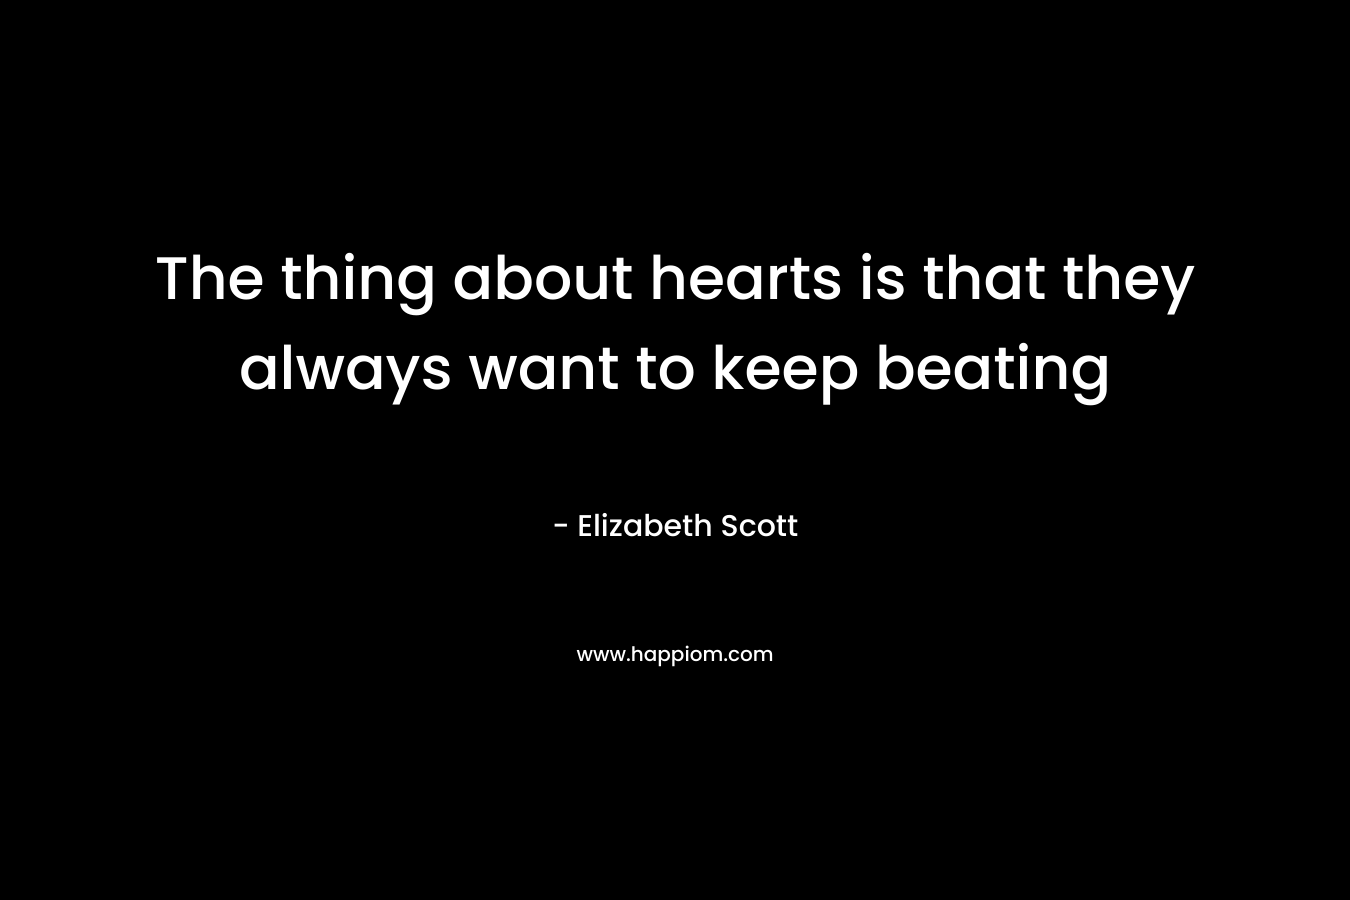 The thing about hearts is that they always want to keep beating – Elizabeth Scott